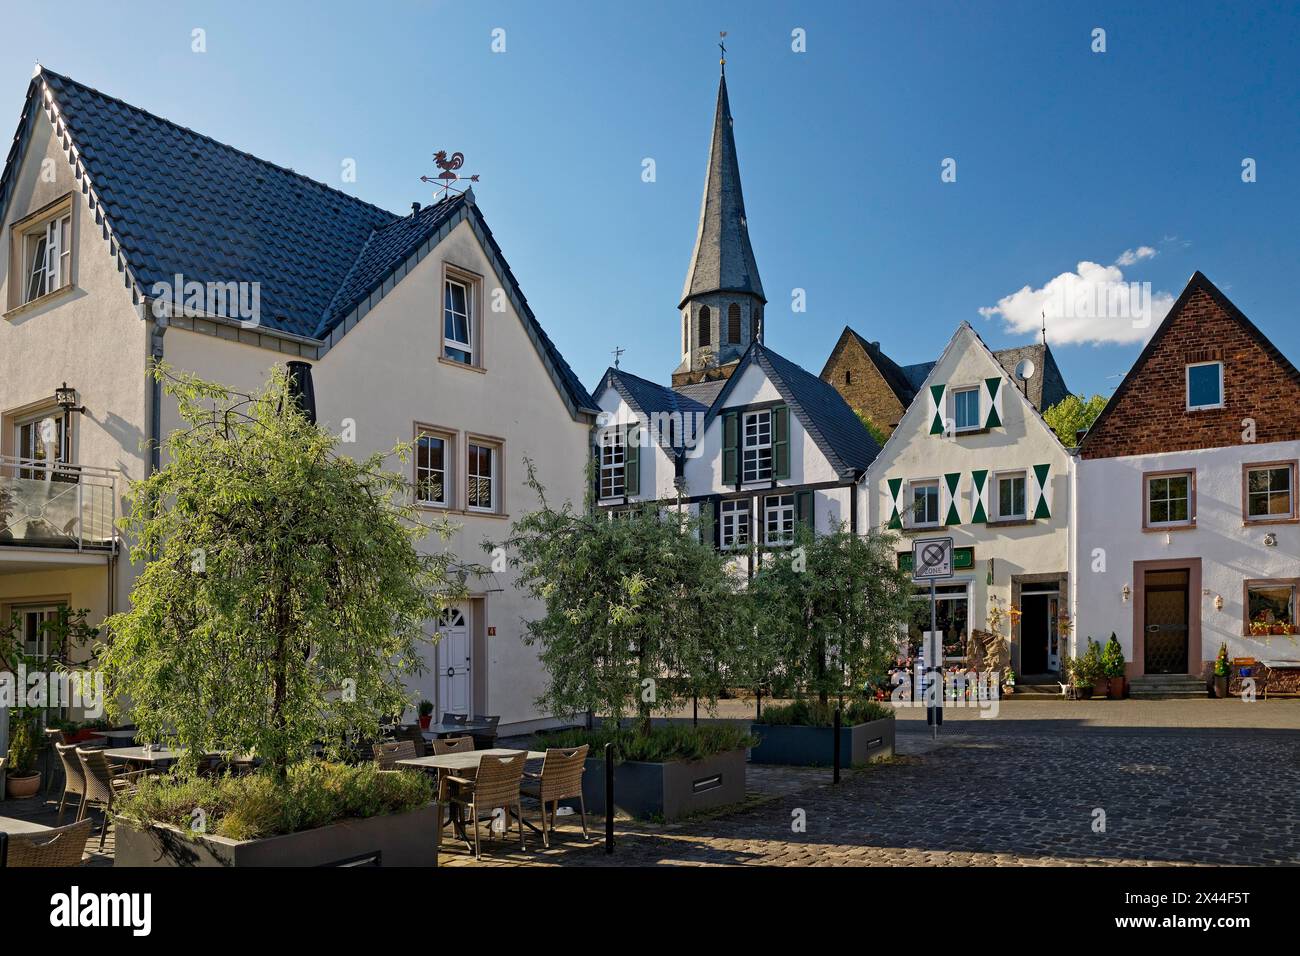 Old town of Zons with the tower of the parish church of St Martinus, Dormagen, Lower Rhine, North Rhine-Westphalia, Germany Stock Photo